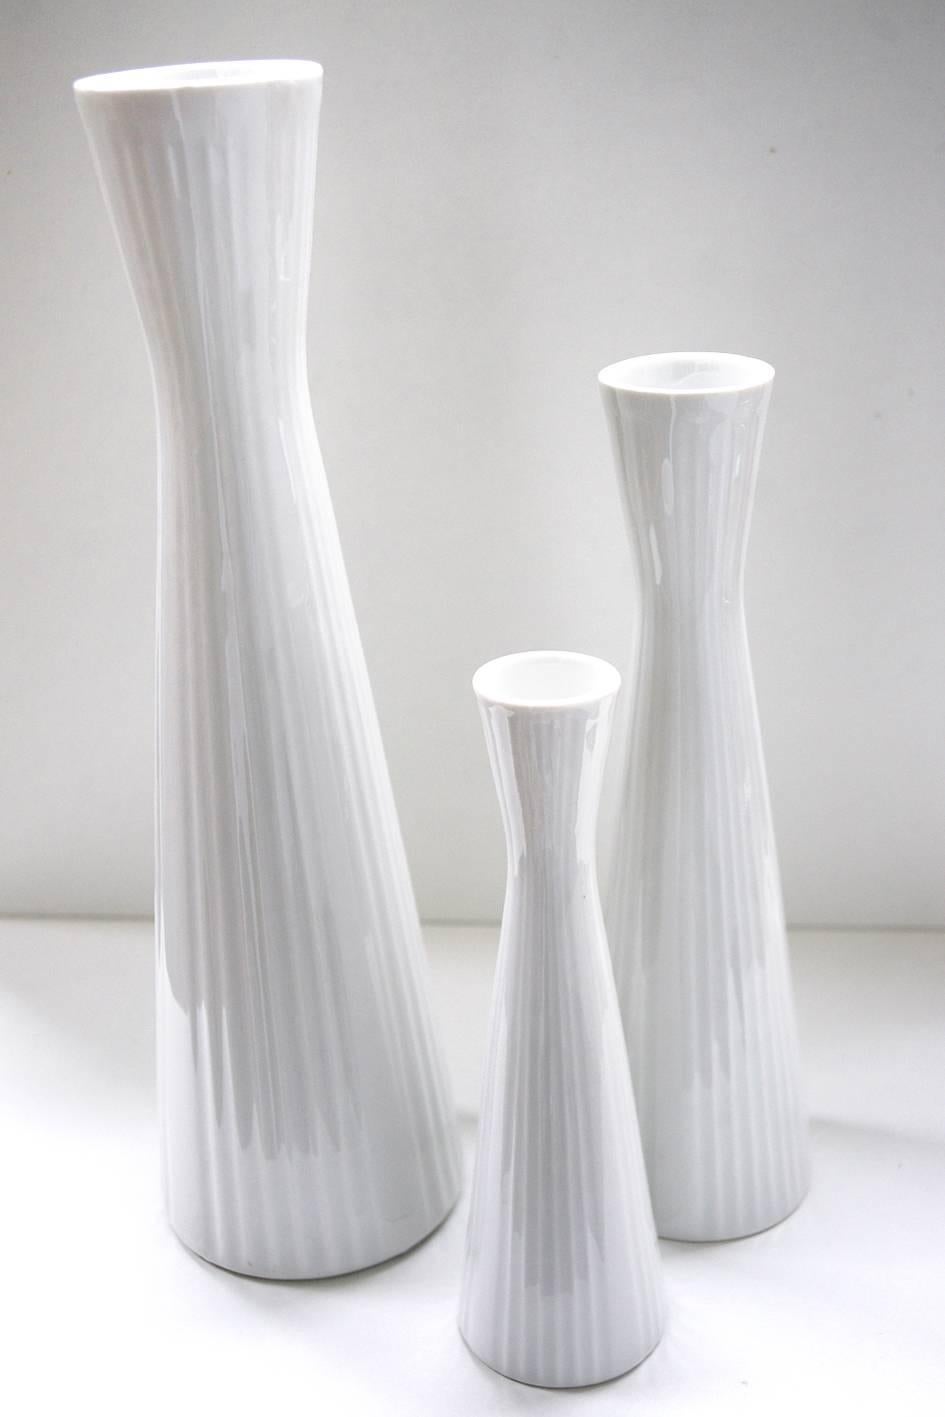 Beautiful set of three white porcelain vases by Schumann Arzberg Bavaria, Germany, 1960s.

1. Height: 13.5 In
2. Height: 10.3 In
3. Height: 8 In
Price for set!
